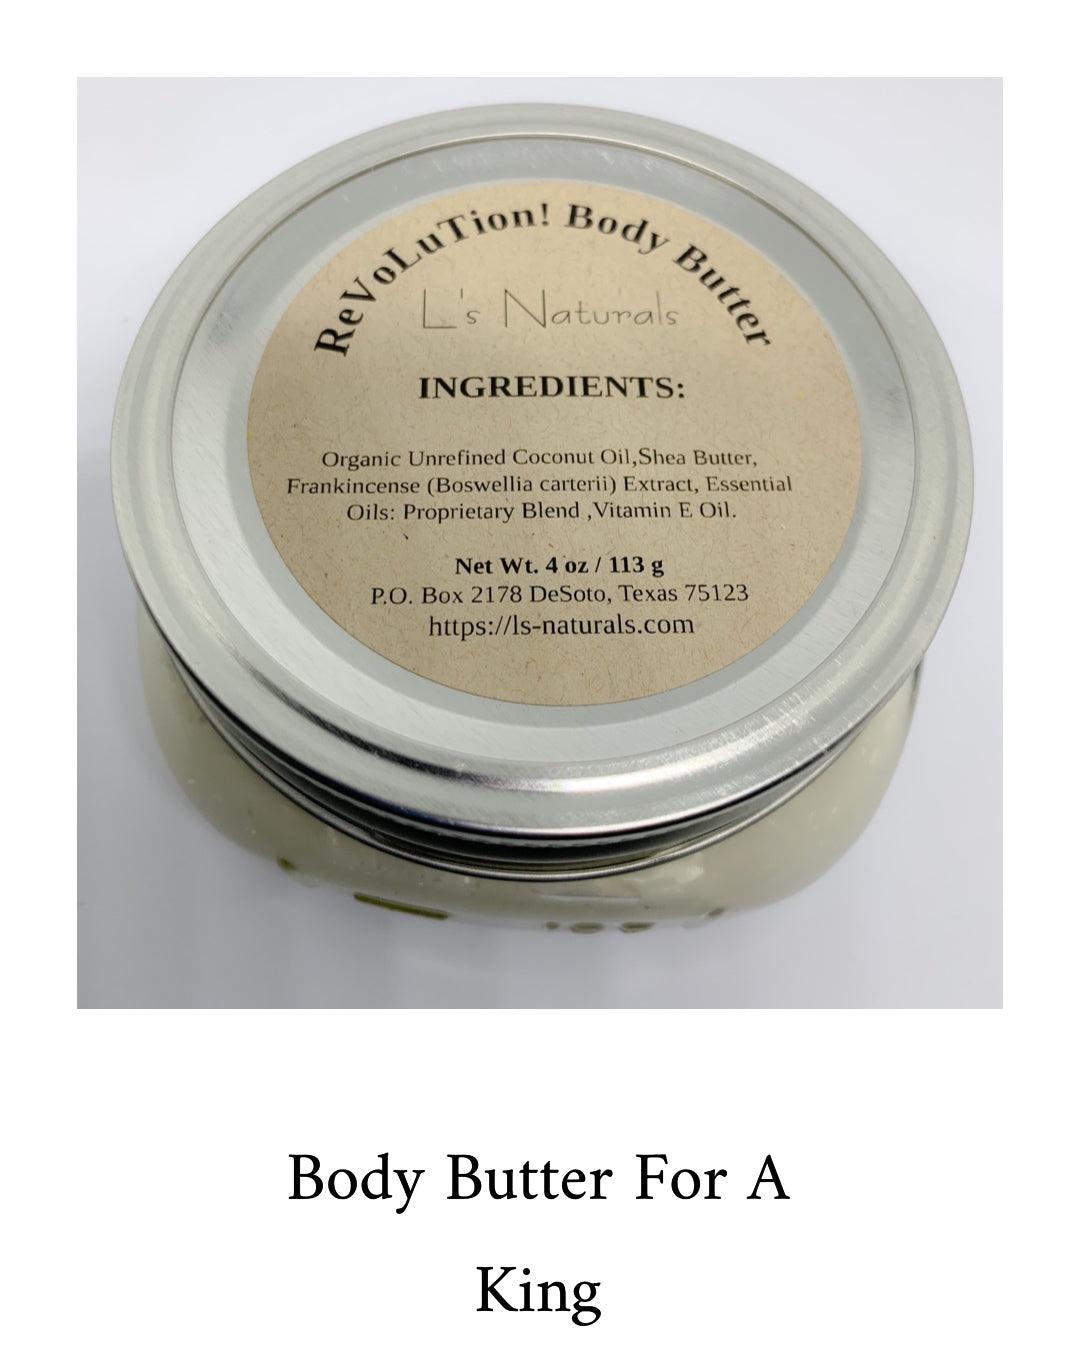 Body Butter for a King